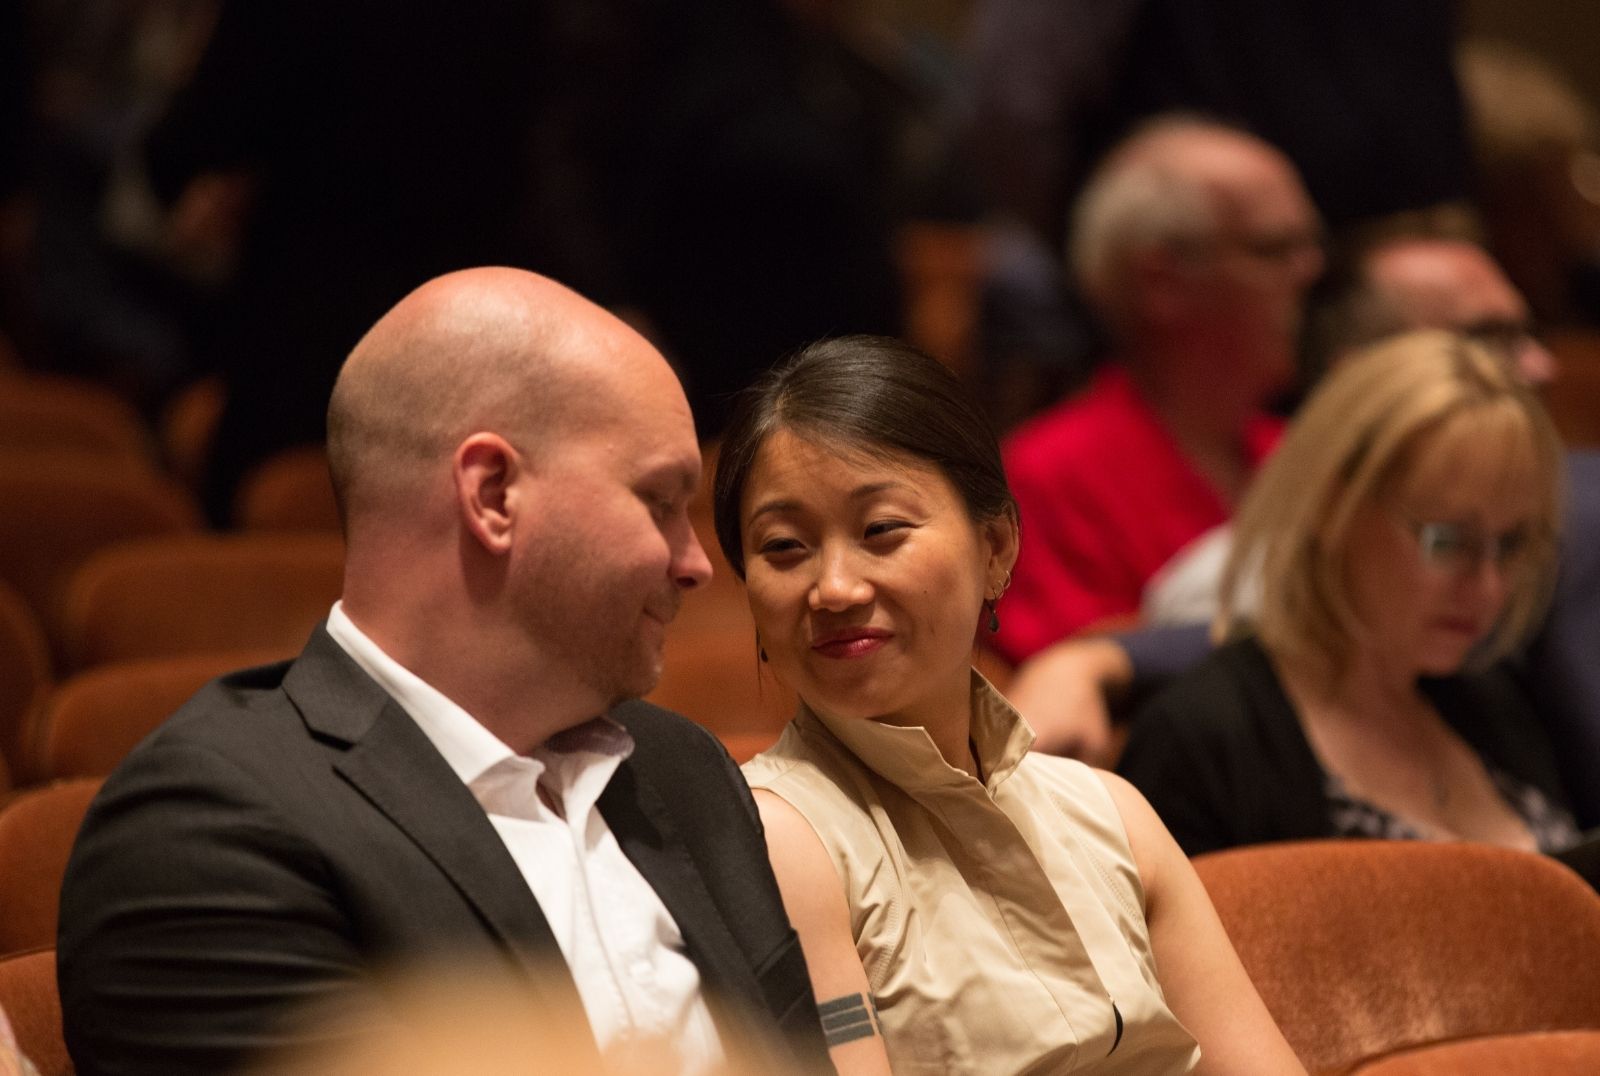 Couple chatting in the Meyerson Symphony Hall before the concert